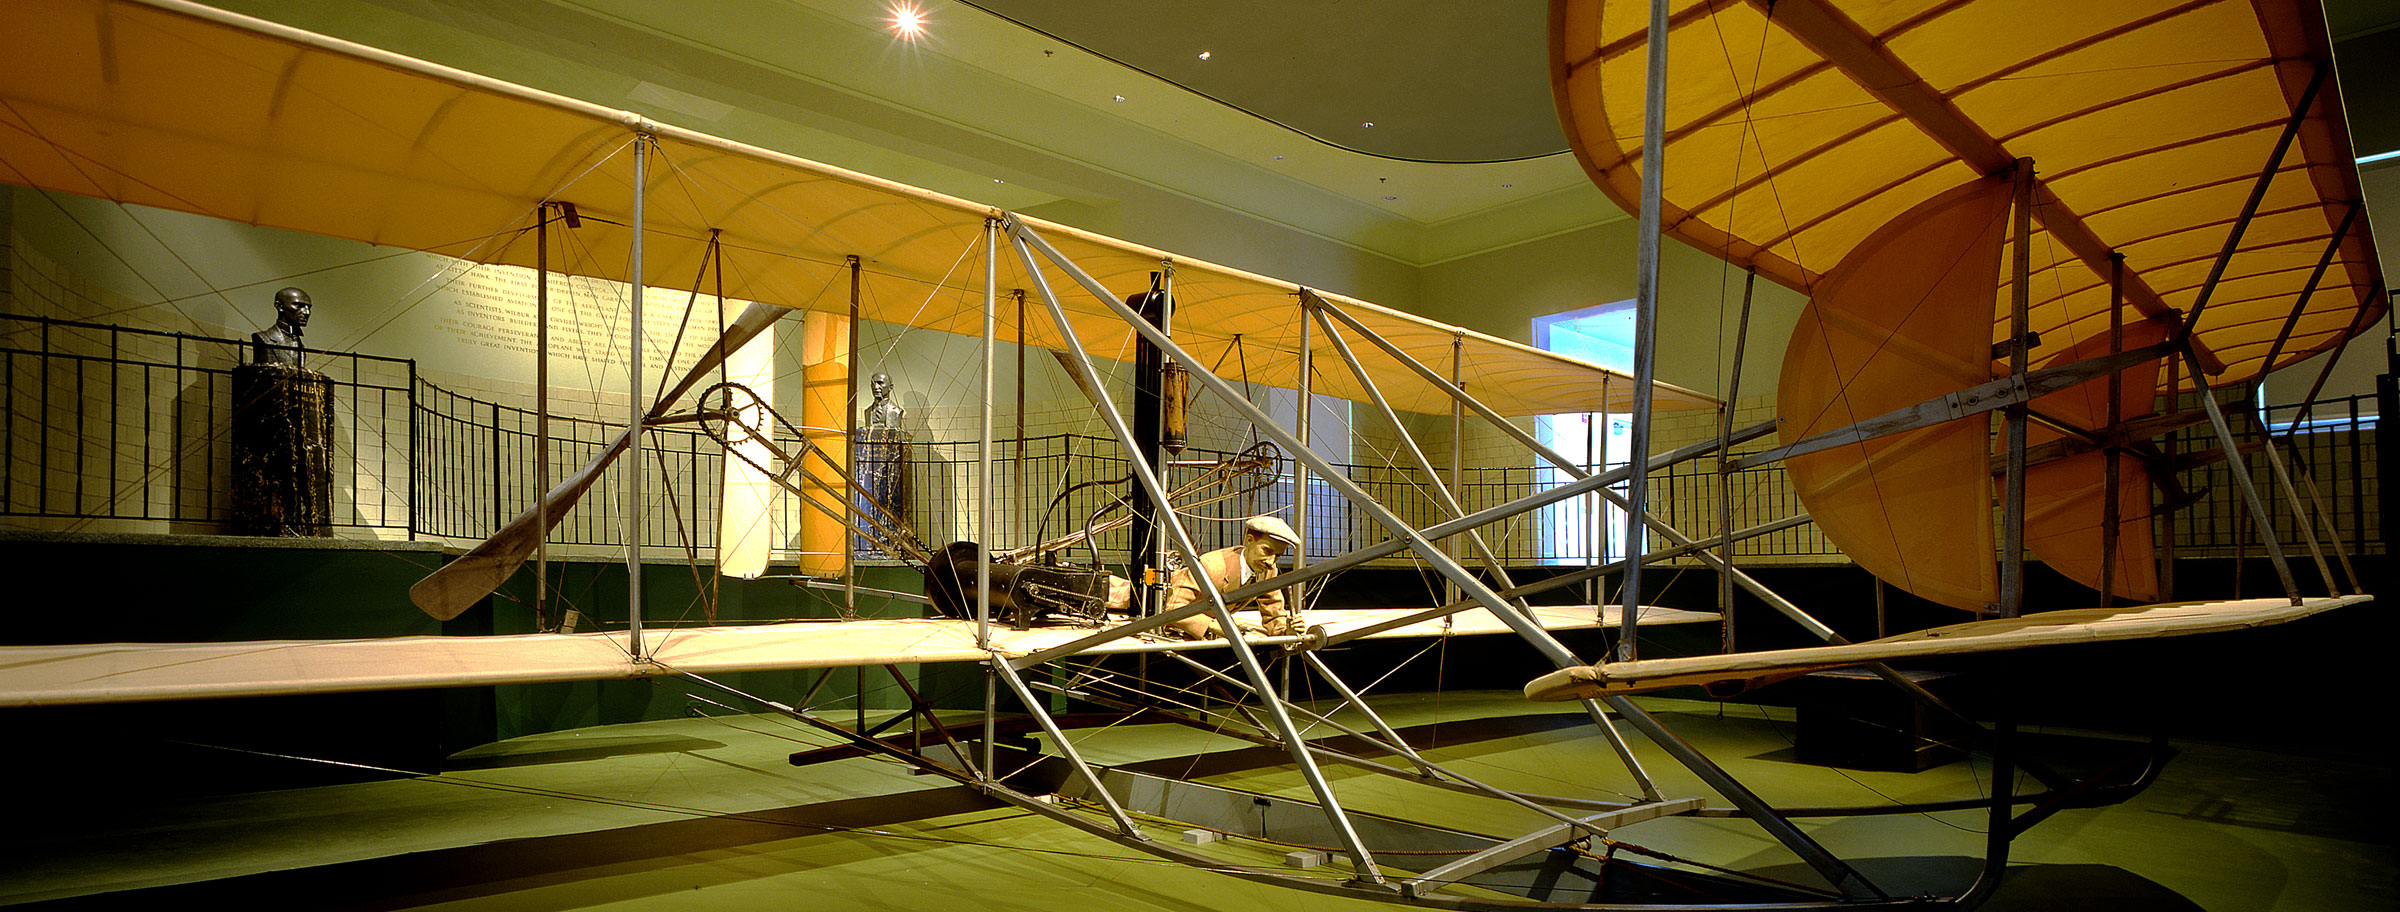 The John W. Berry, Sr. Wright Brothers National Museum has more Wright artifacts on display than any other place in the world, including the 1905 Wright Flyer III: the only airplane designated a National Historic Landmark, the first practical flying machine, and what the Wright brothers considered their most important aircraft.